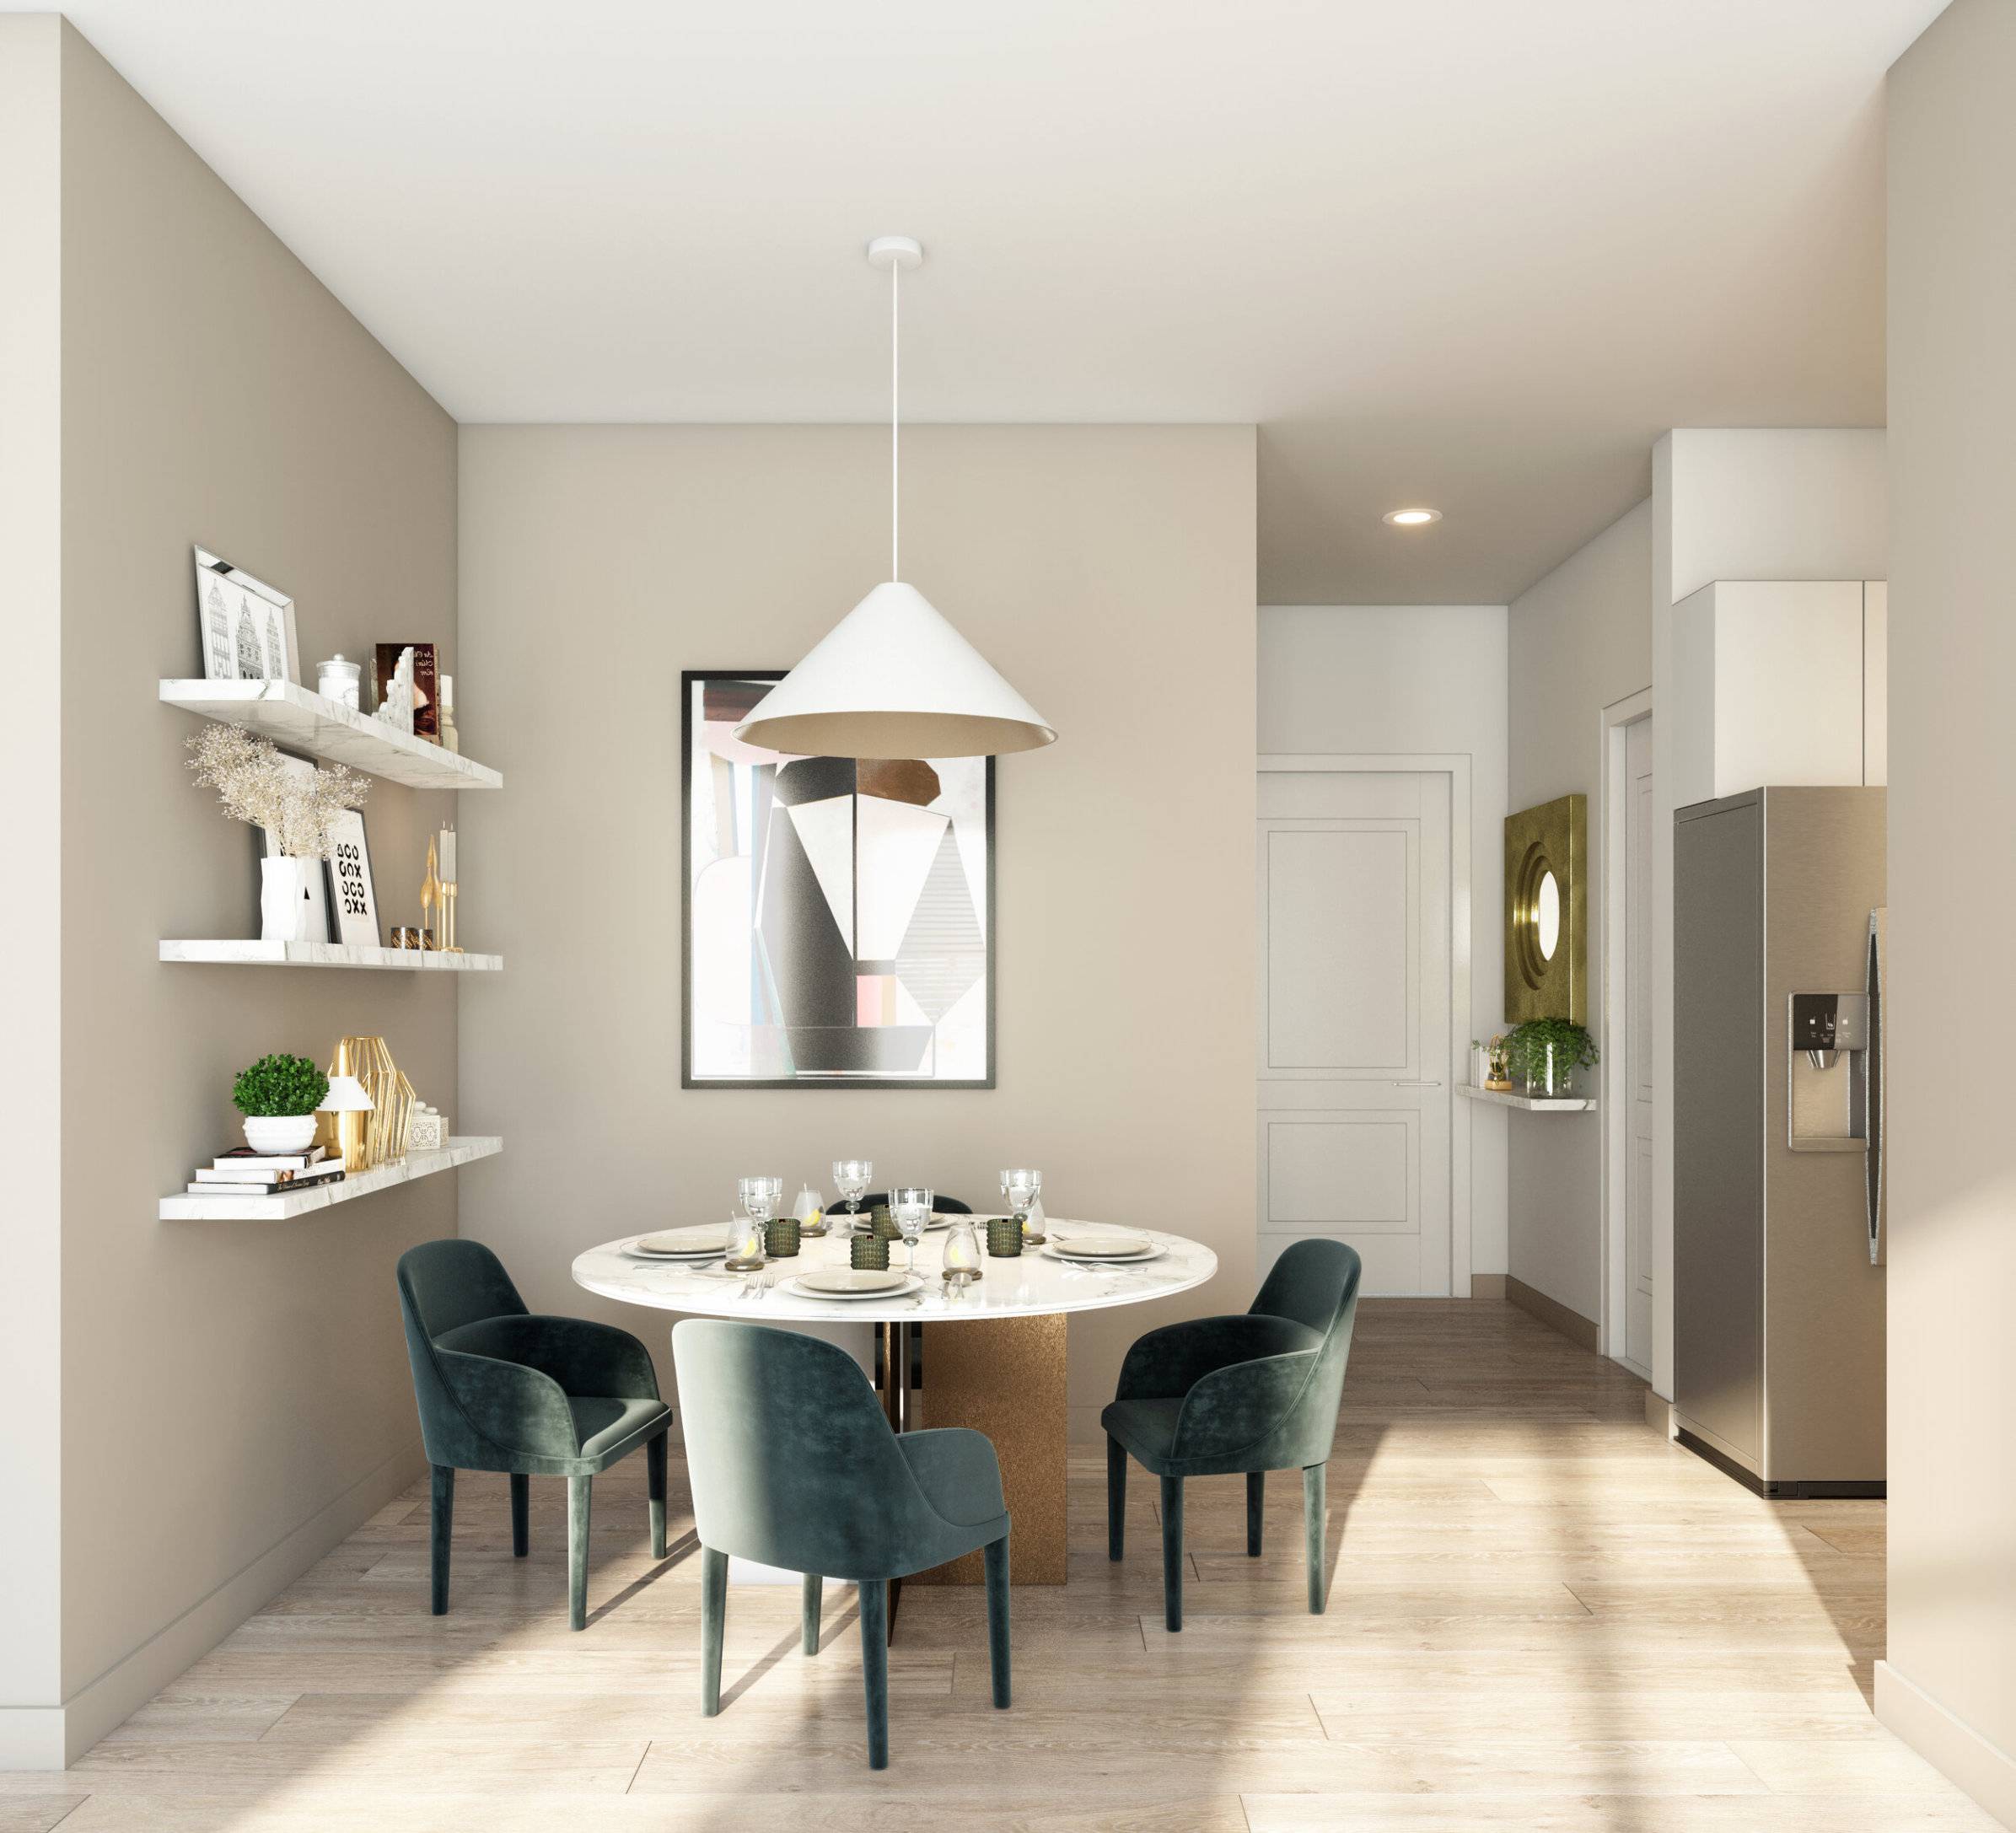 This is the final one bedroom unit remaining for sale at The Luxe Condominium, a ground up new development where timeless elegance meets undeniable value.